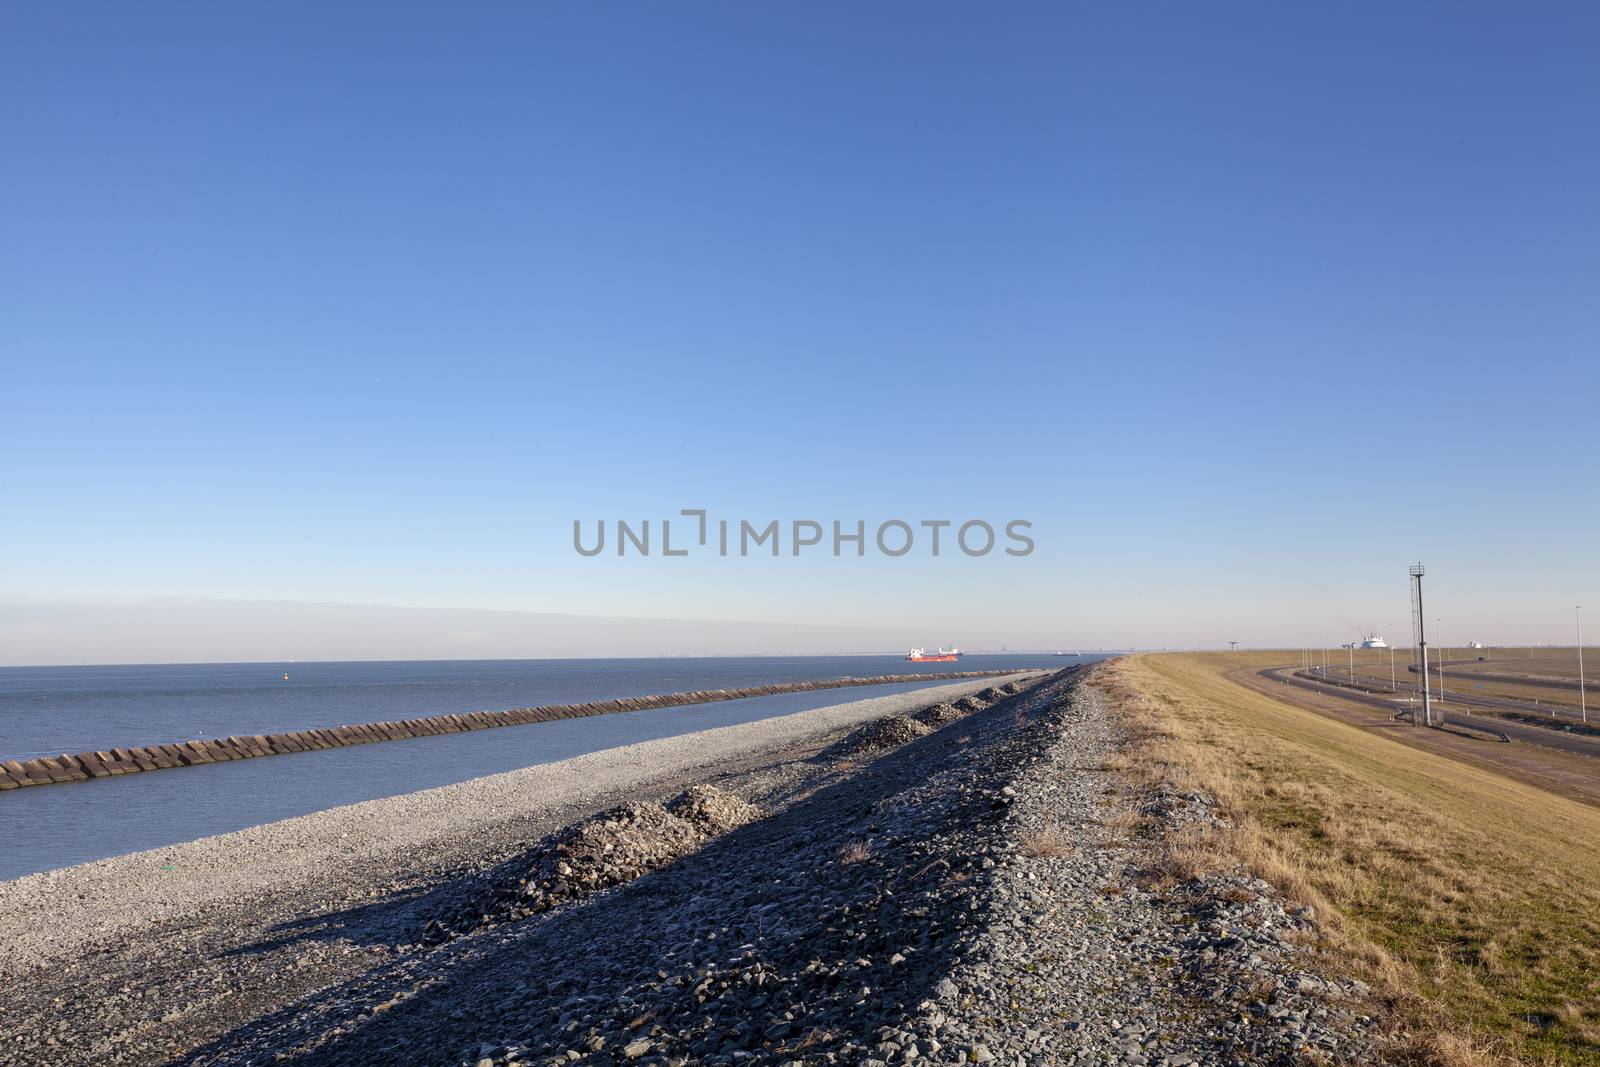 Concrete breakwaters. Seascape with tetrapodes to protect coasta by Tjeerdkruse